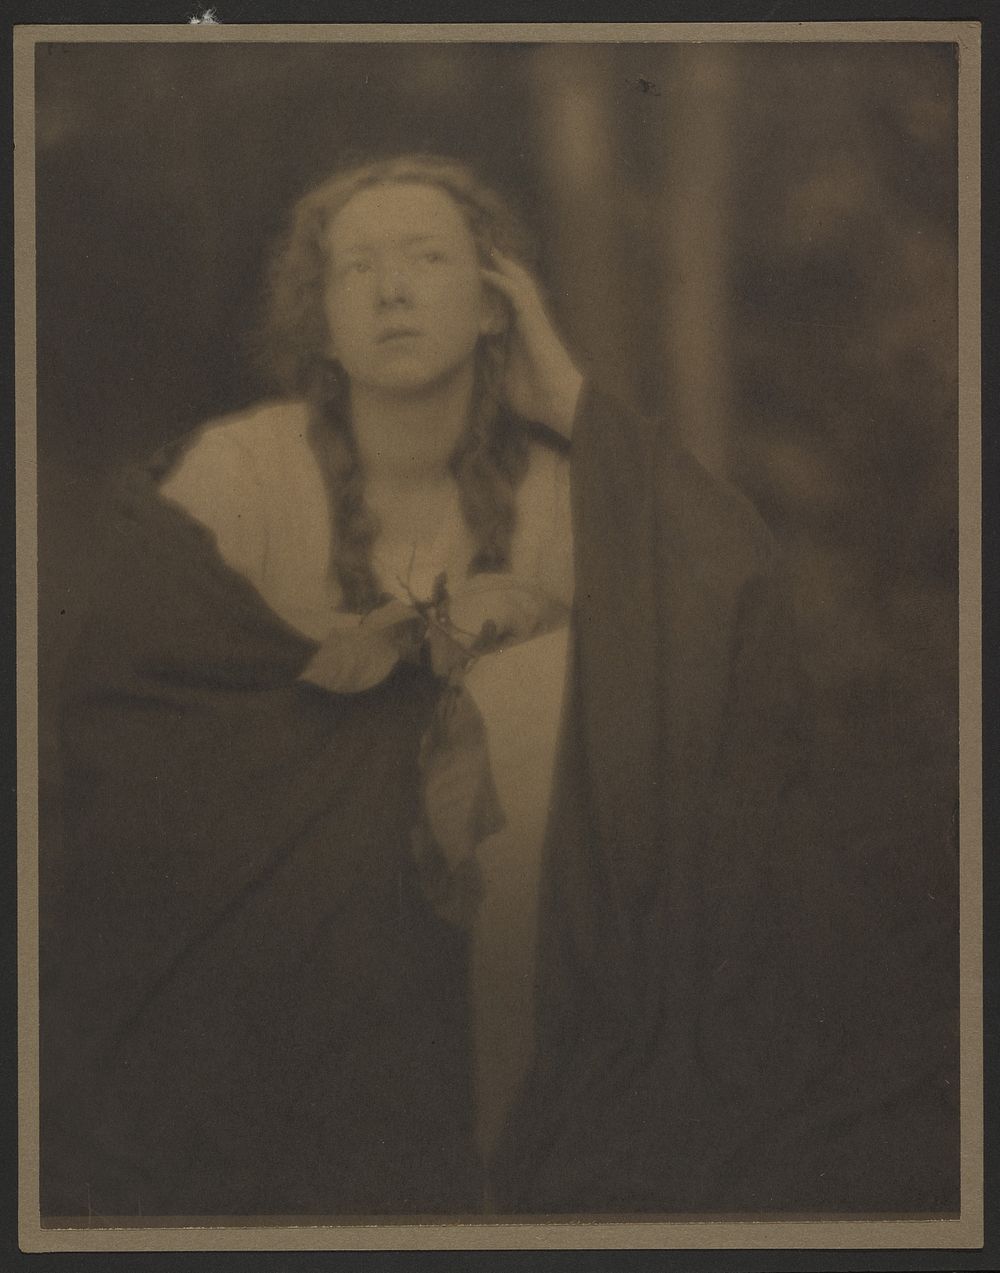 Young Woman in Pigtails with Shawl Around Her Shoulders by Clarence H White